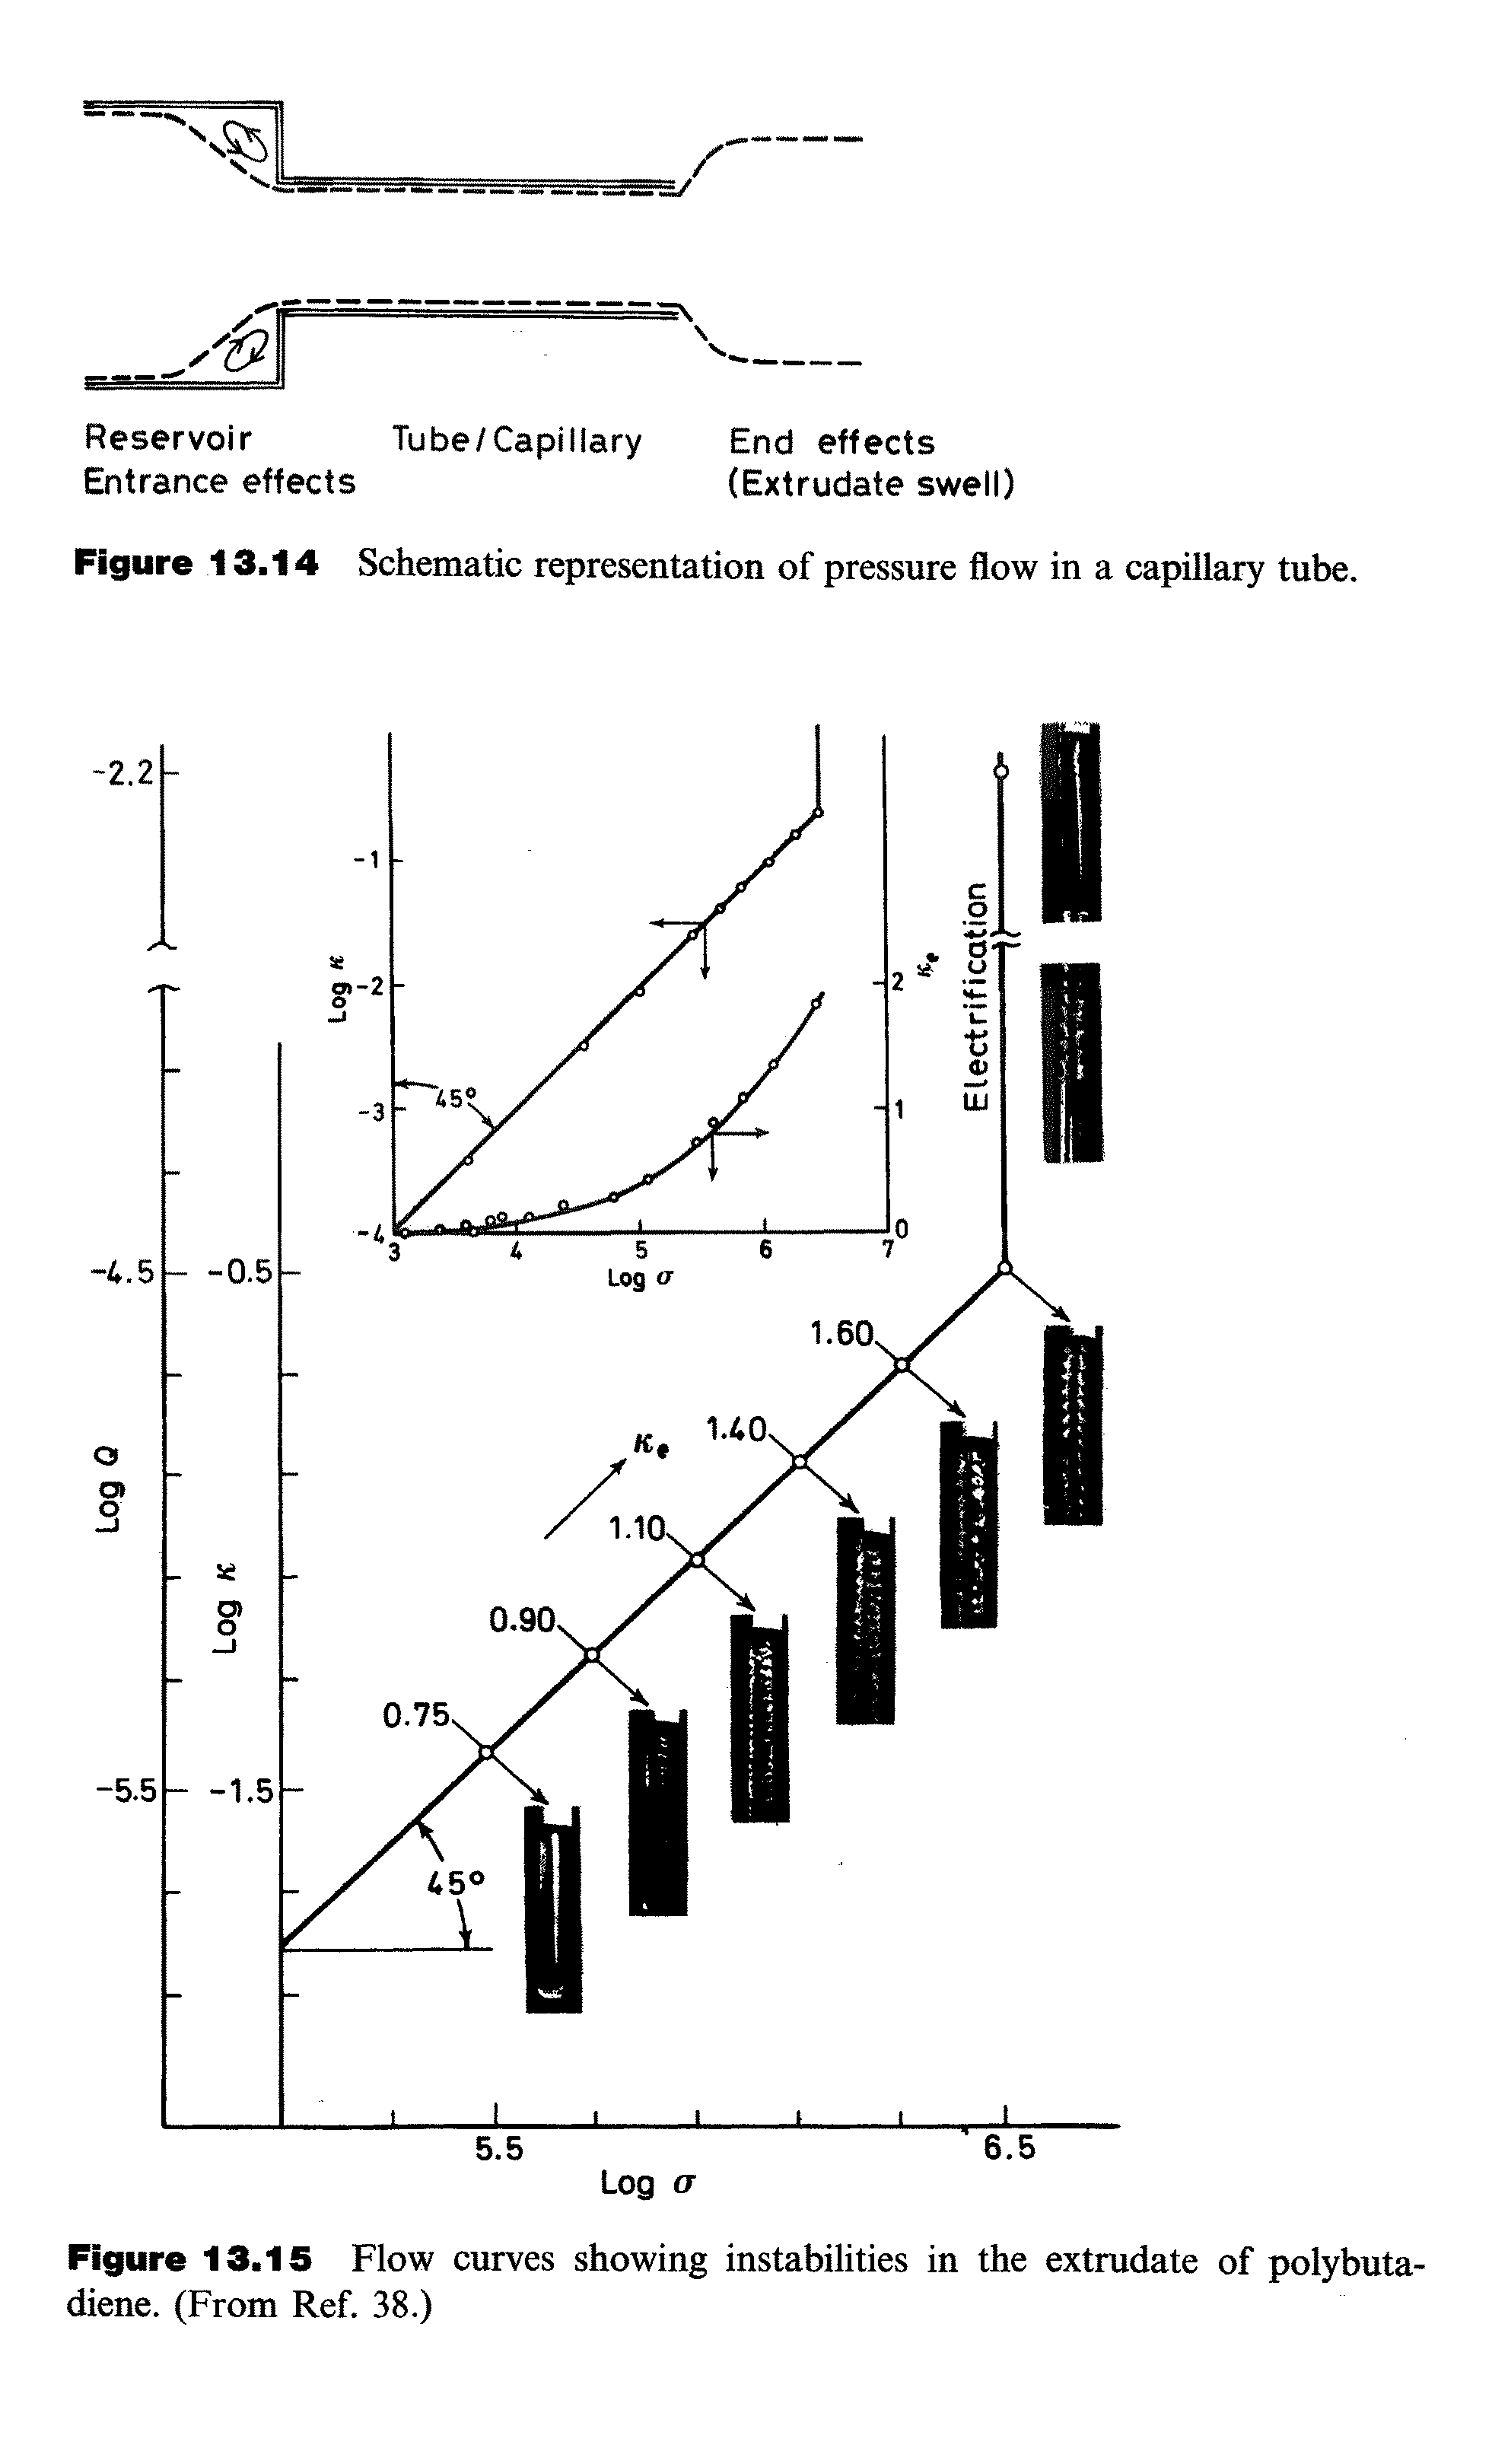 Figure 13.14 Schematic representation of pressure flow in a capillary tube.